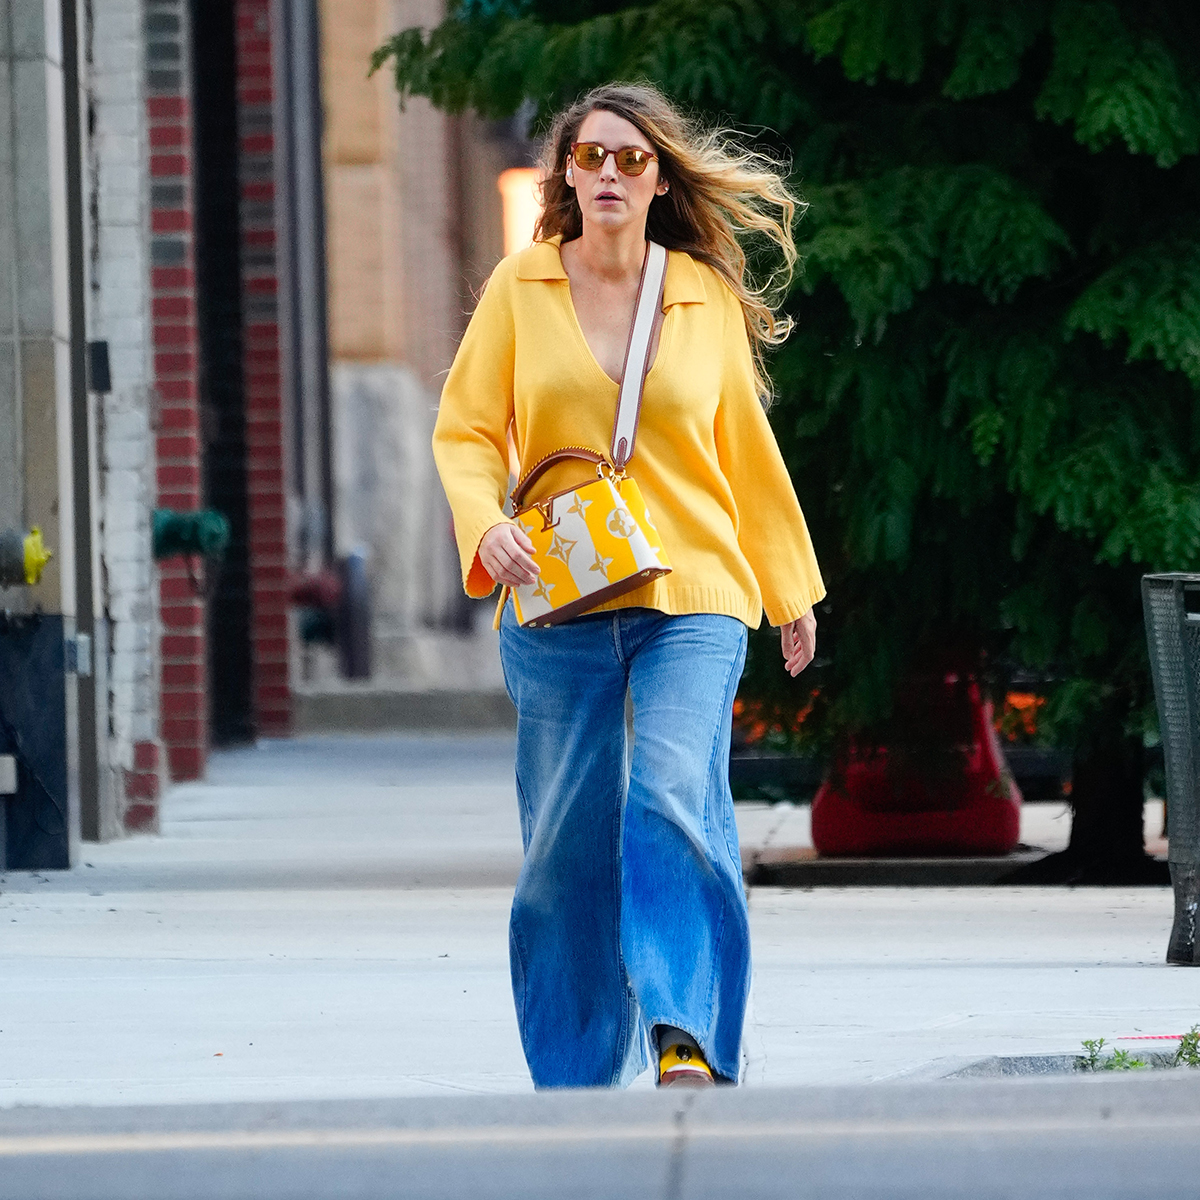 Blake Lively Rocks a Yellow Polo Sweater — Get the Look